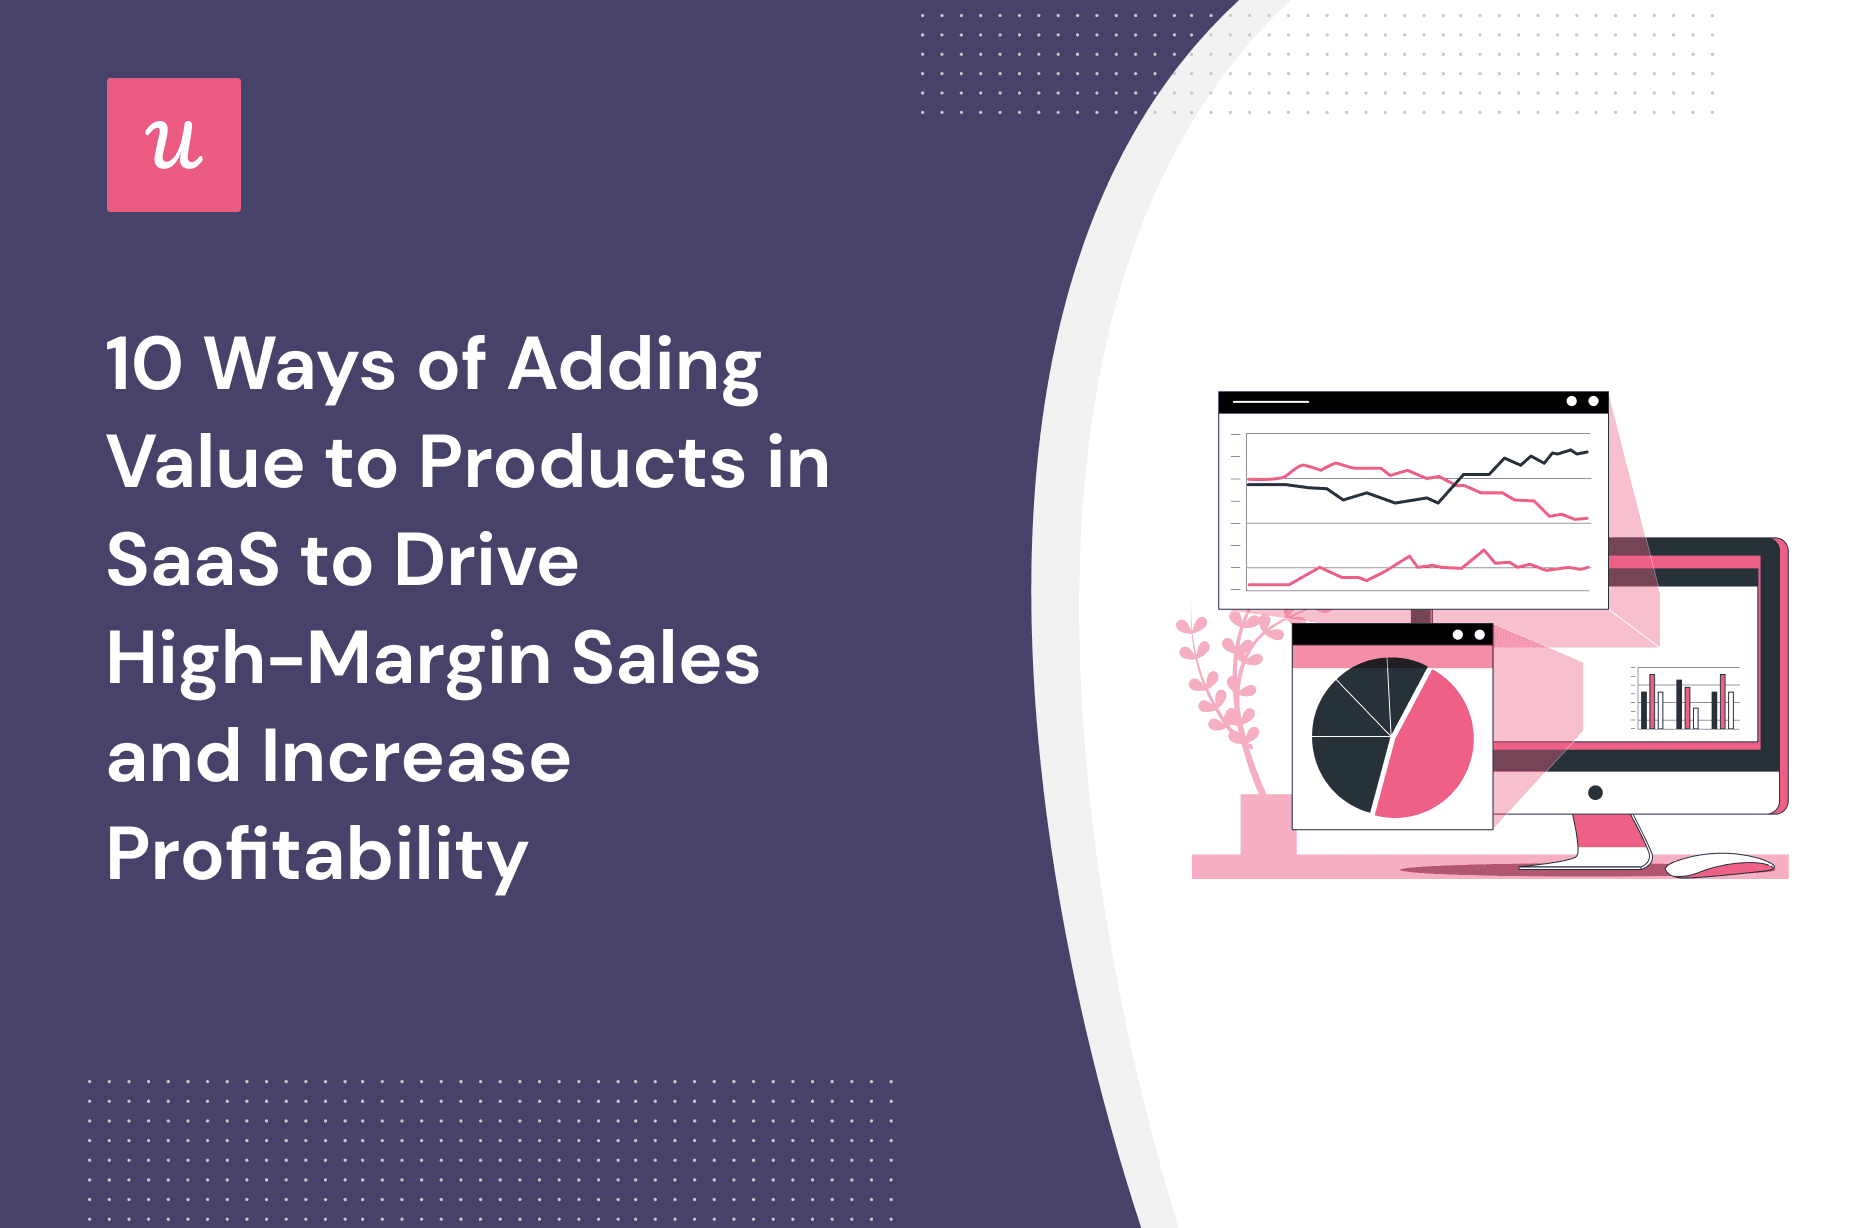 10 Ways of Adding Value to Products in SaaS to Drive High-Margin Sales and Increase Profitability cover